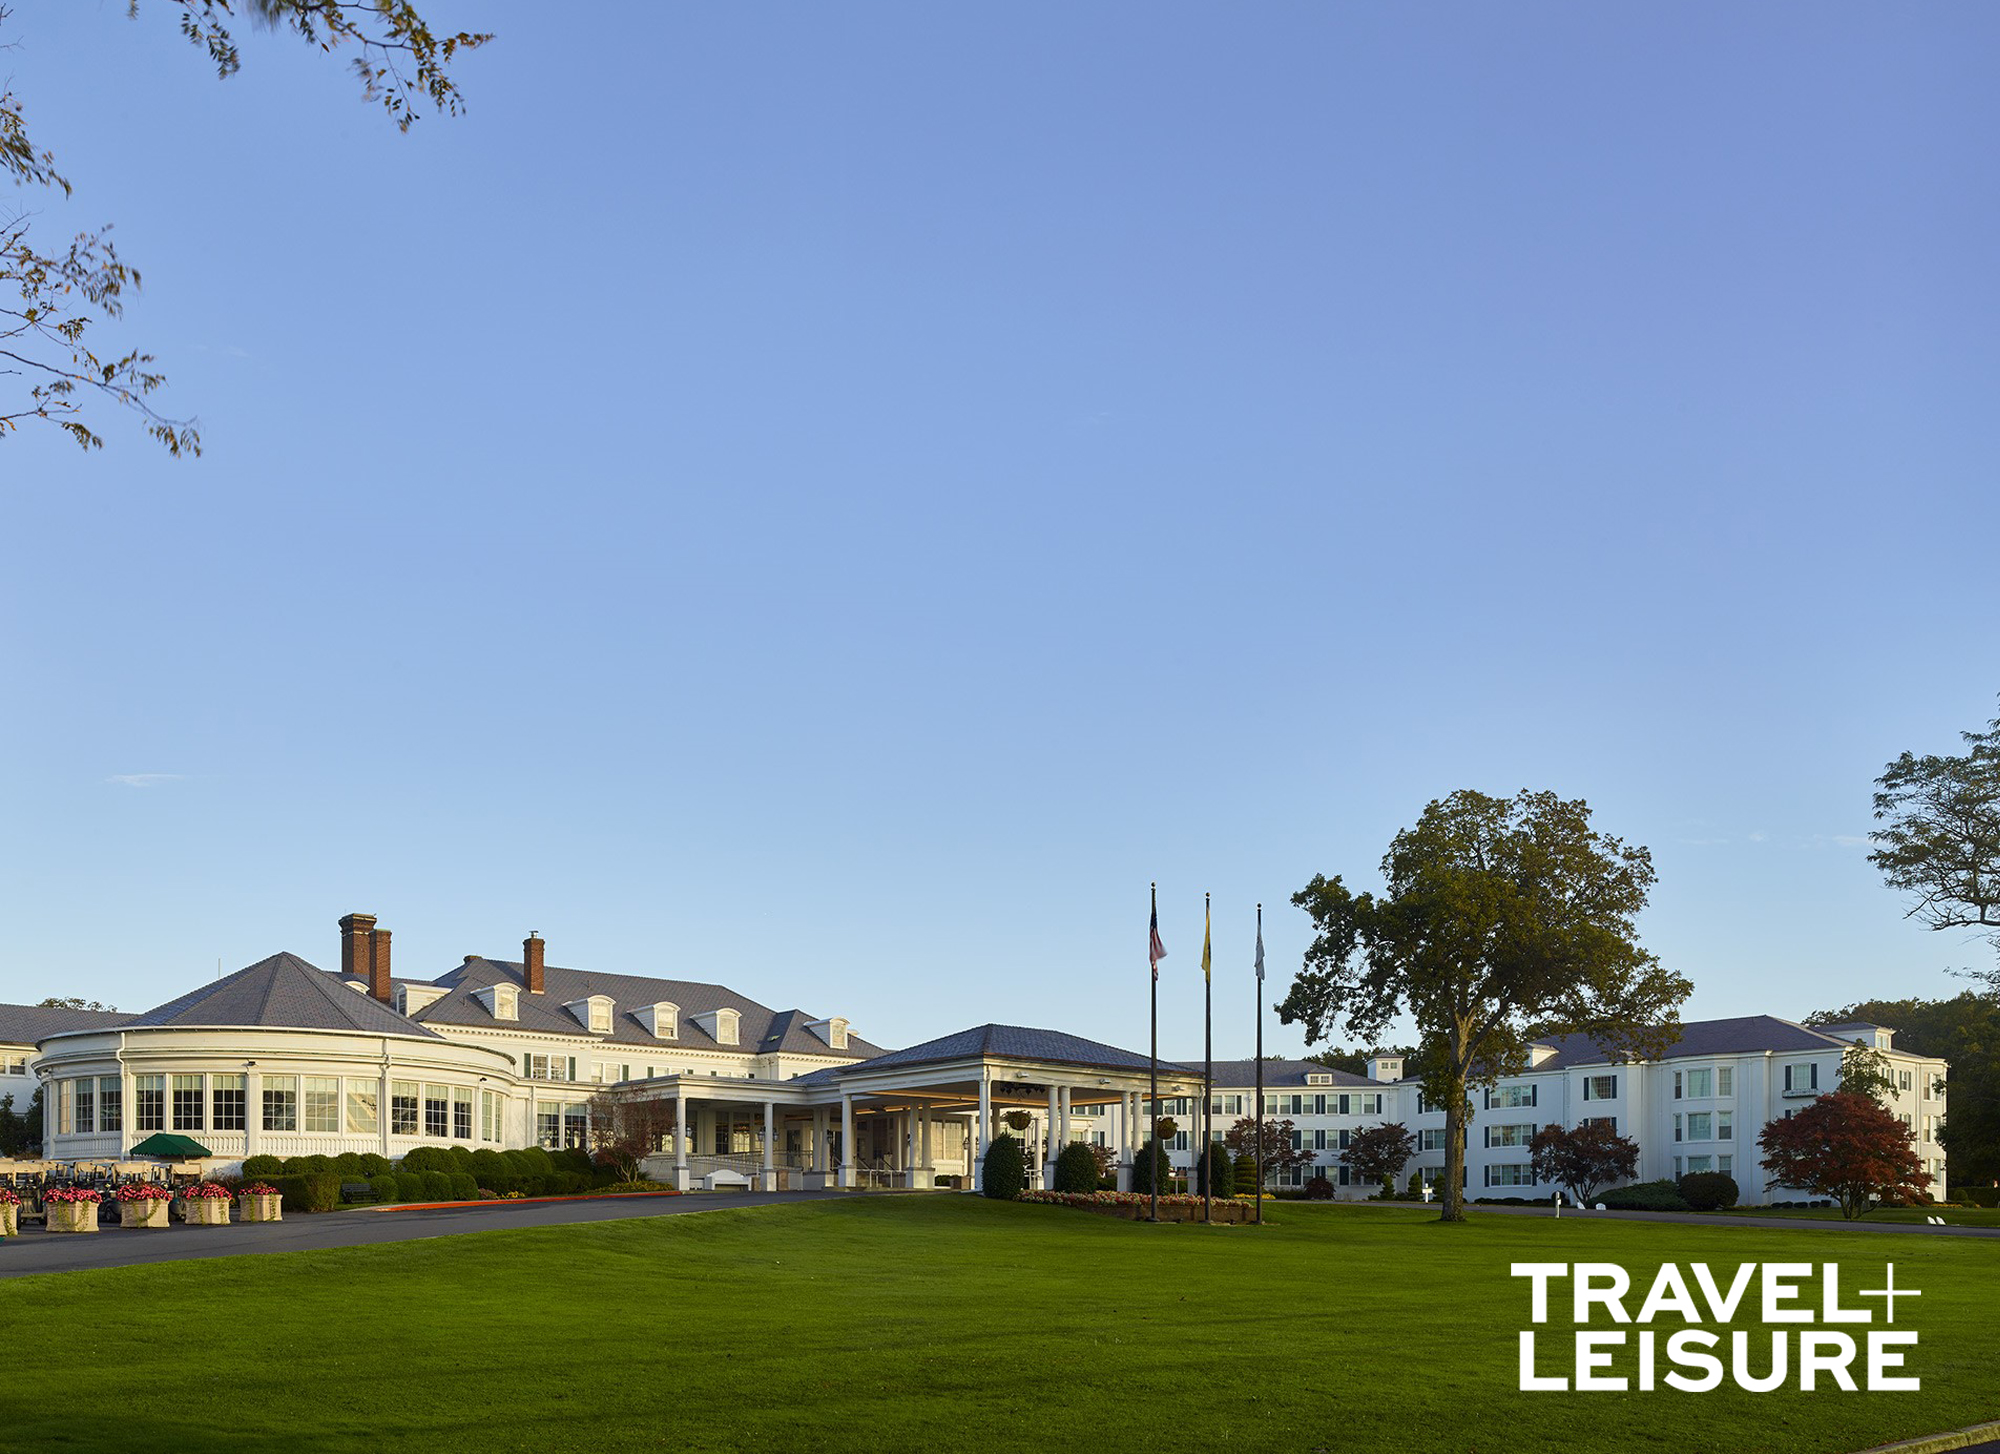 Seaview Hotel & Golf Resort Gets Shout-Out in Travel + Leisure